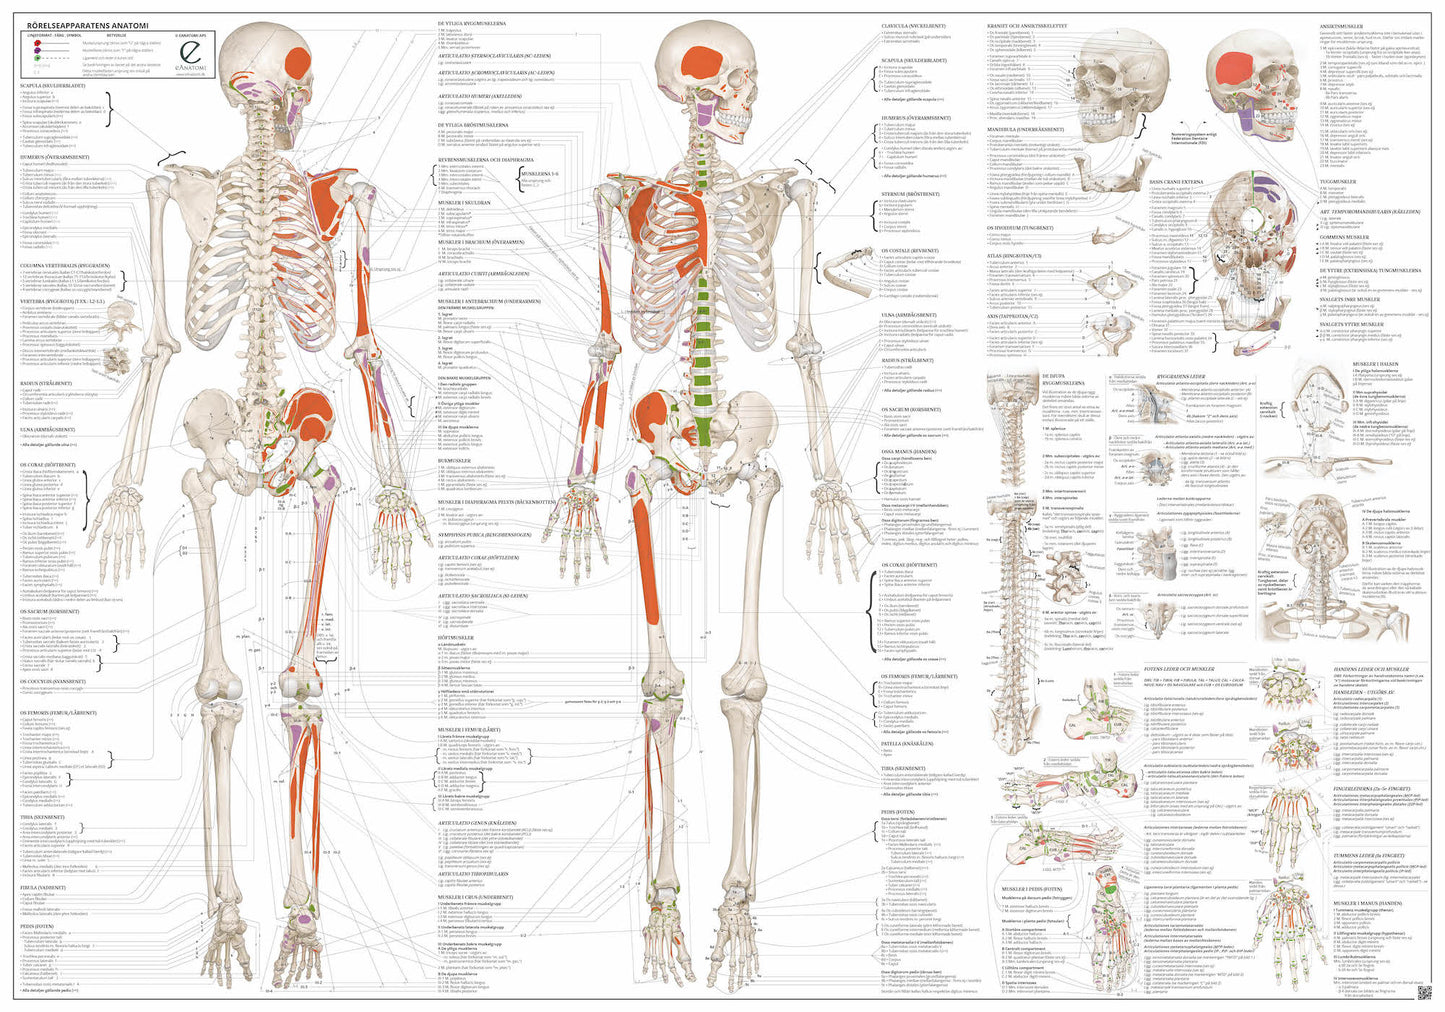 Anatomy poster - Anatomy of the musculoskeletal system EA1